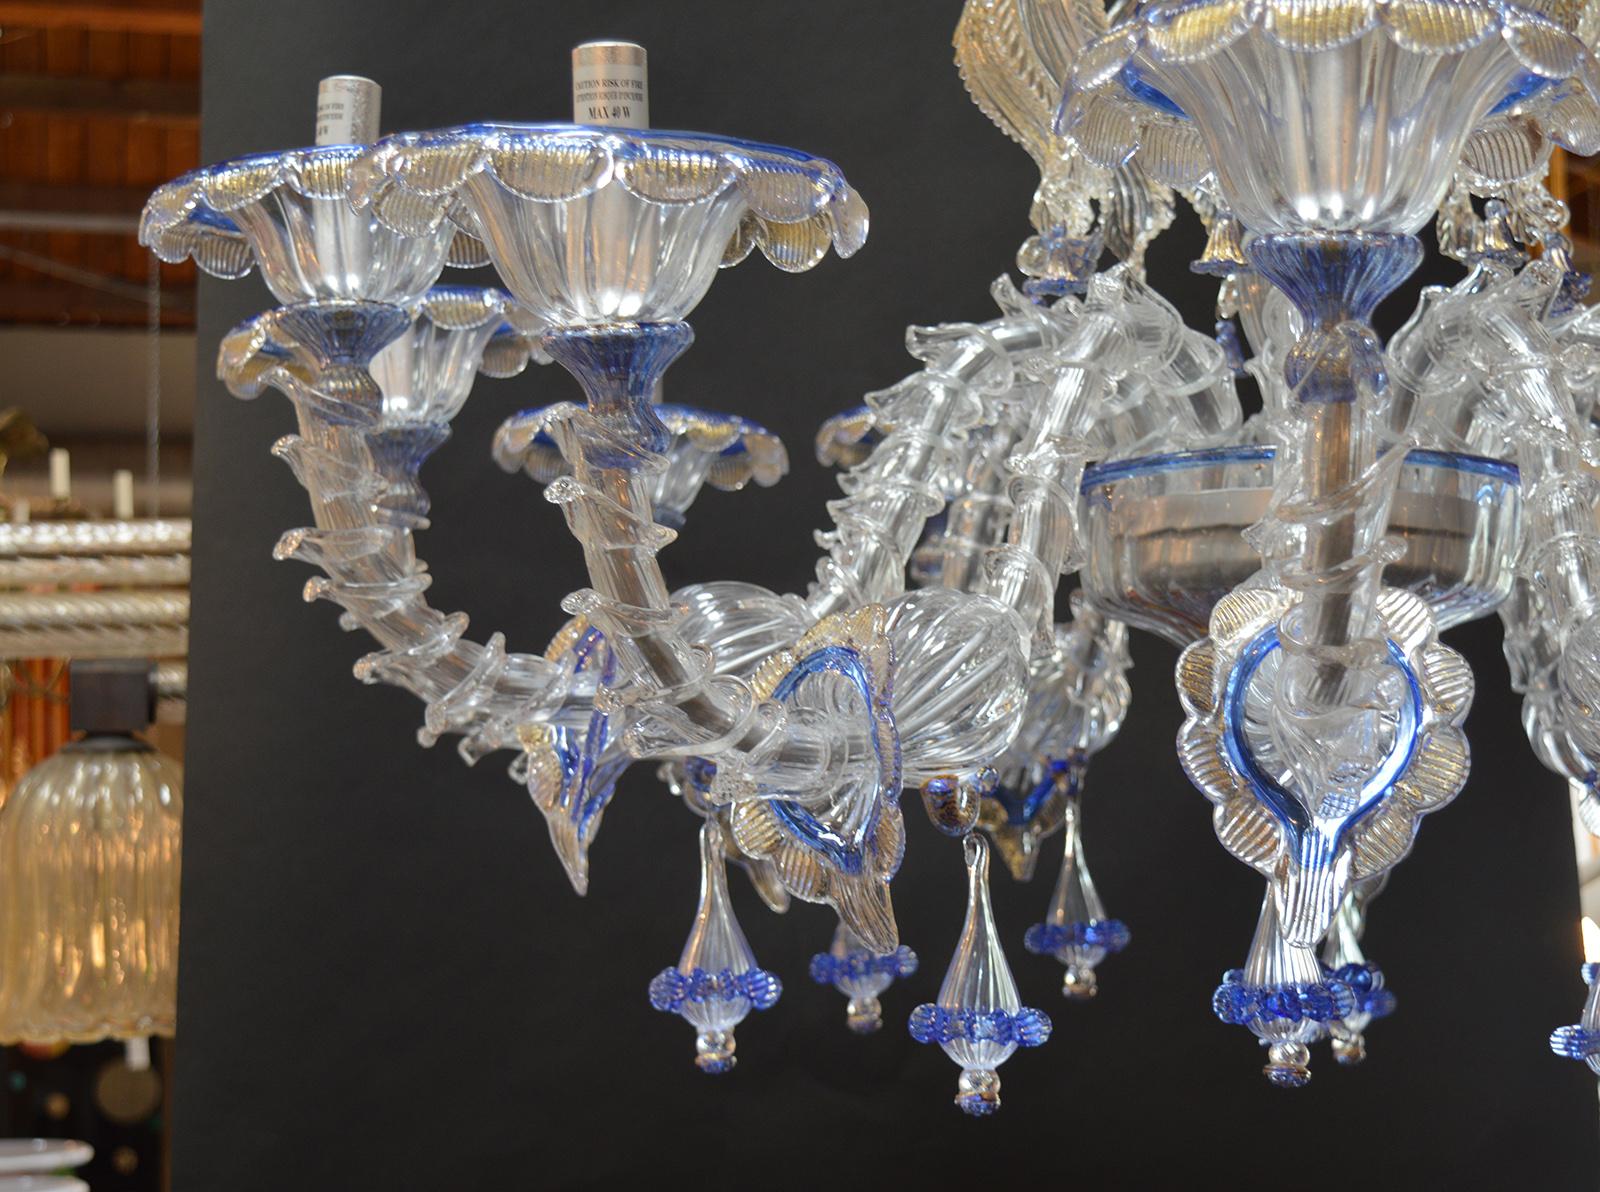 This is a pair of wonderful Murano handmade in Italy chandeliers with a wonderful detail and design in excellent working condition. Blue details with gold flecks.